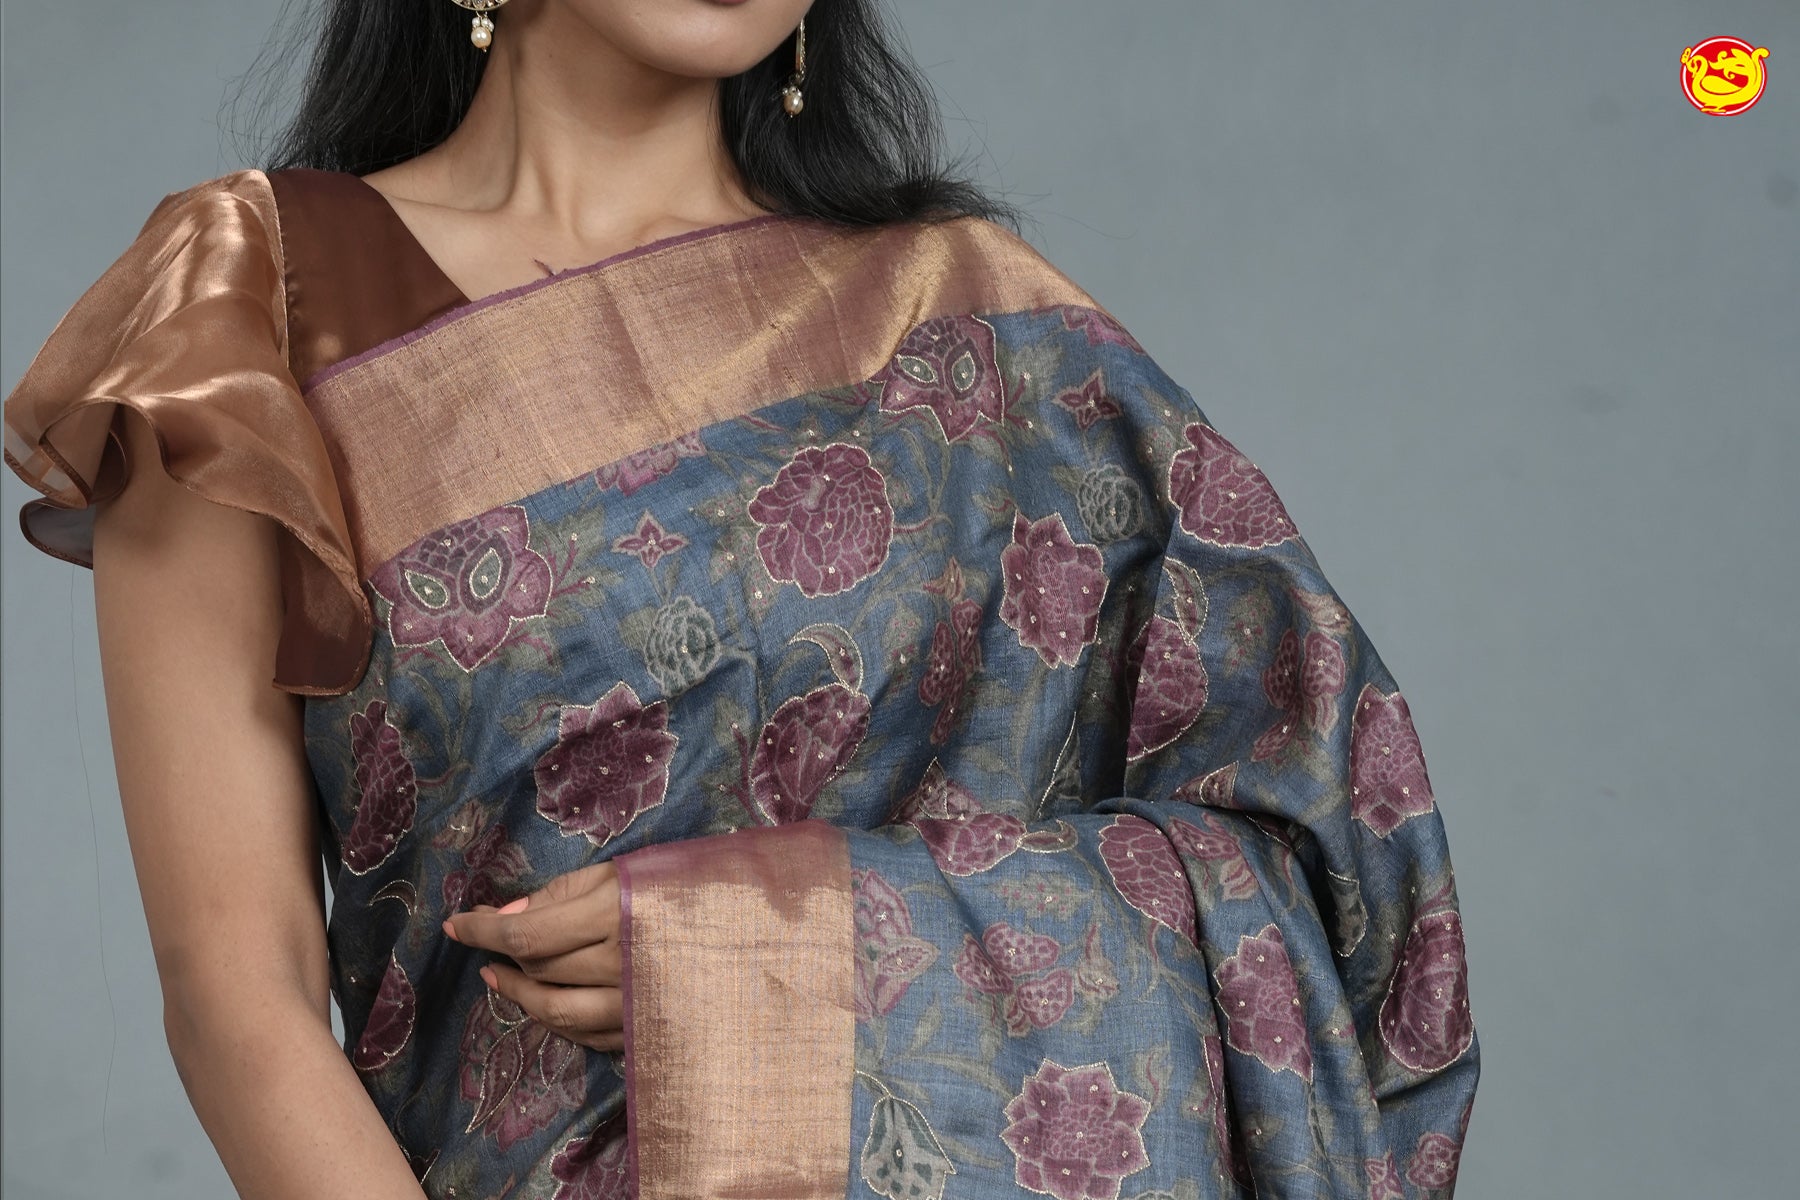 Grey With Maroon Pure handwoven Tussar silk saree with hand embroidery over digital prints